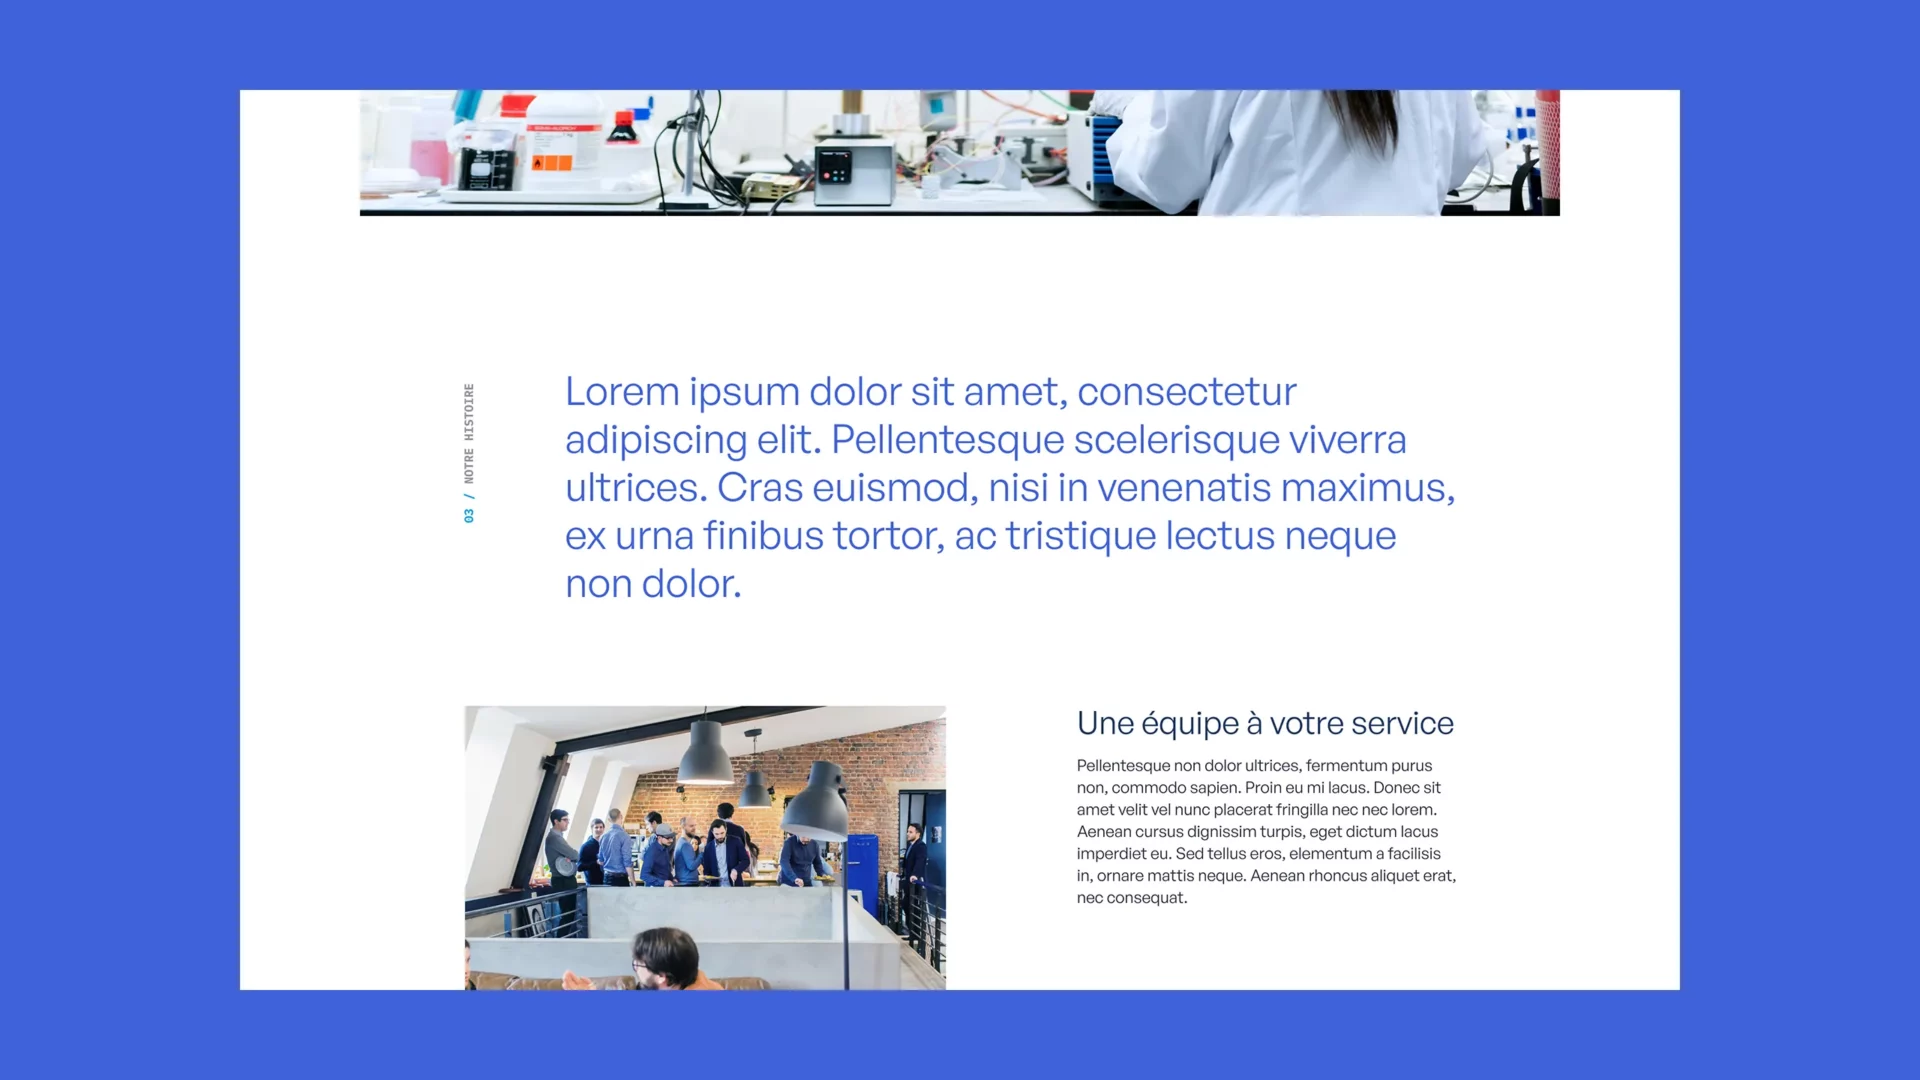 Part of Cebeadeau website's about page placed on a blue background